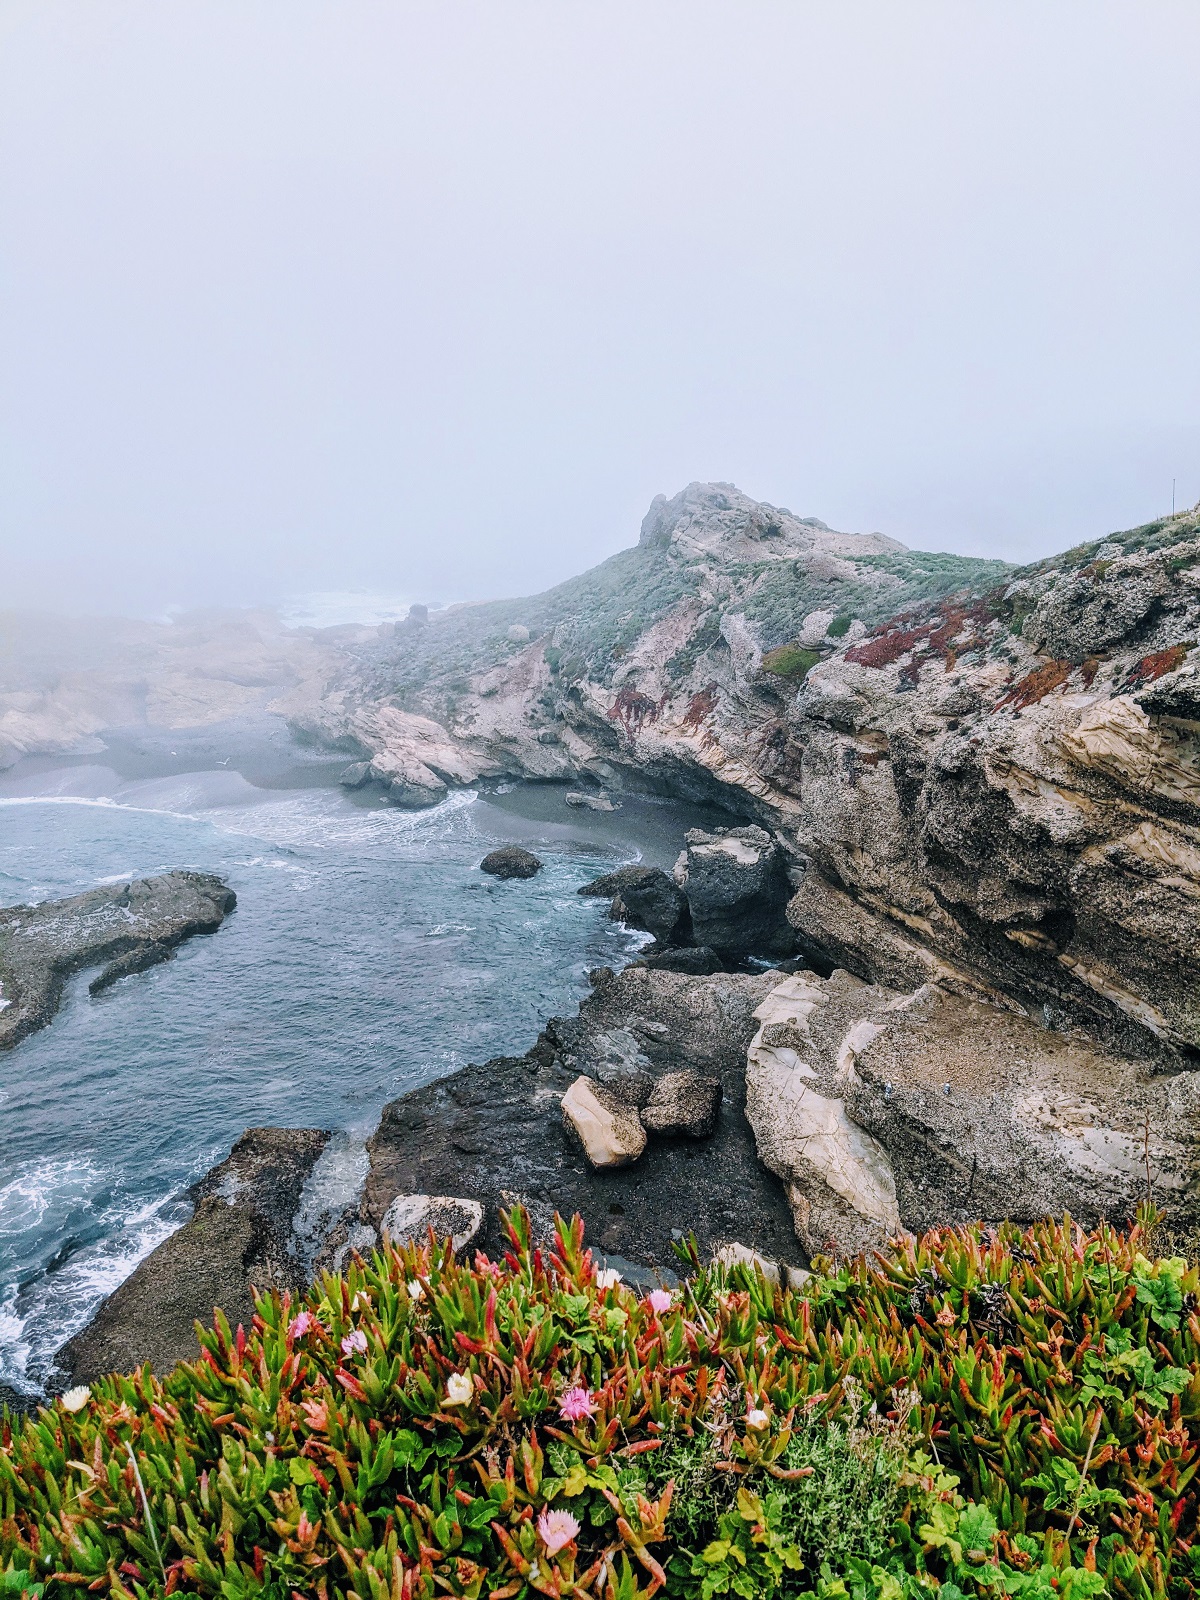 foggy cliff along the california coast with rocky shore and colorful bush in foreground